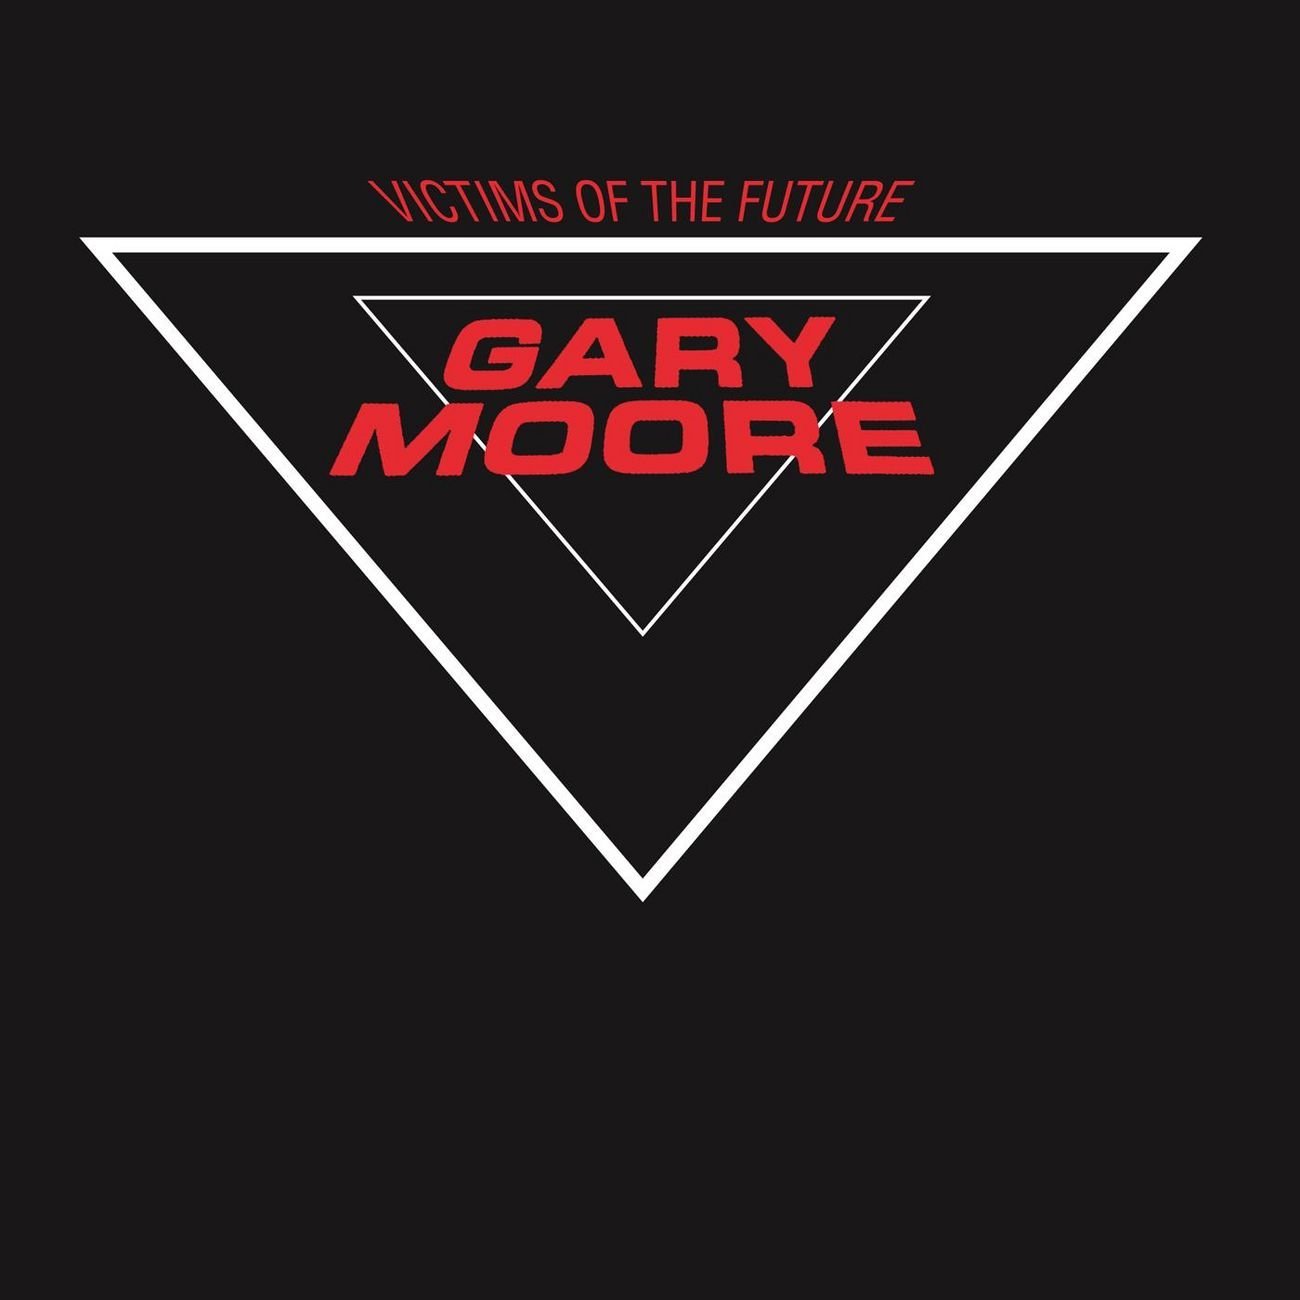 GARY MOORE - Victims Of The Future cover 